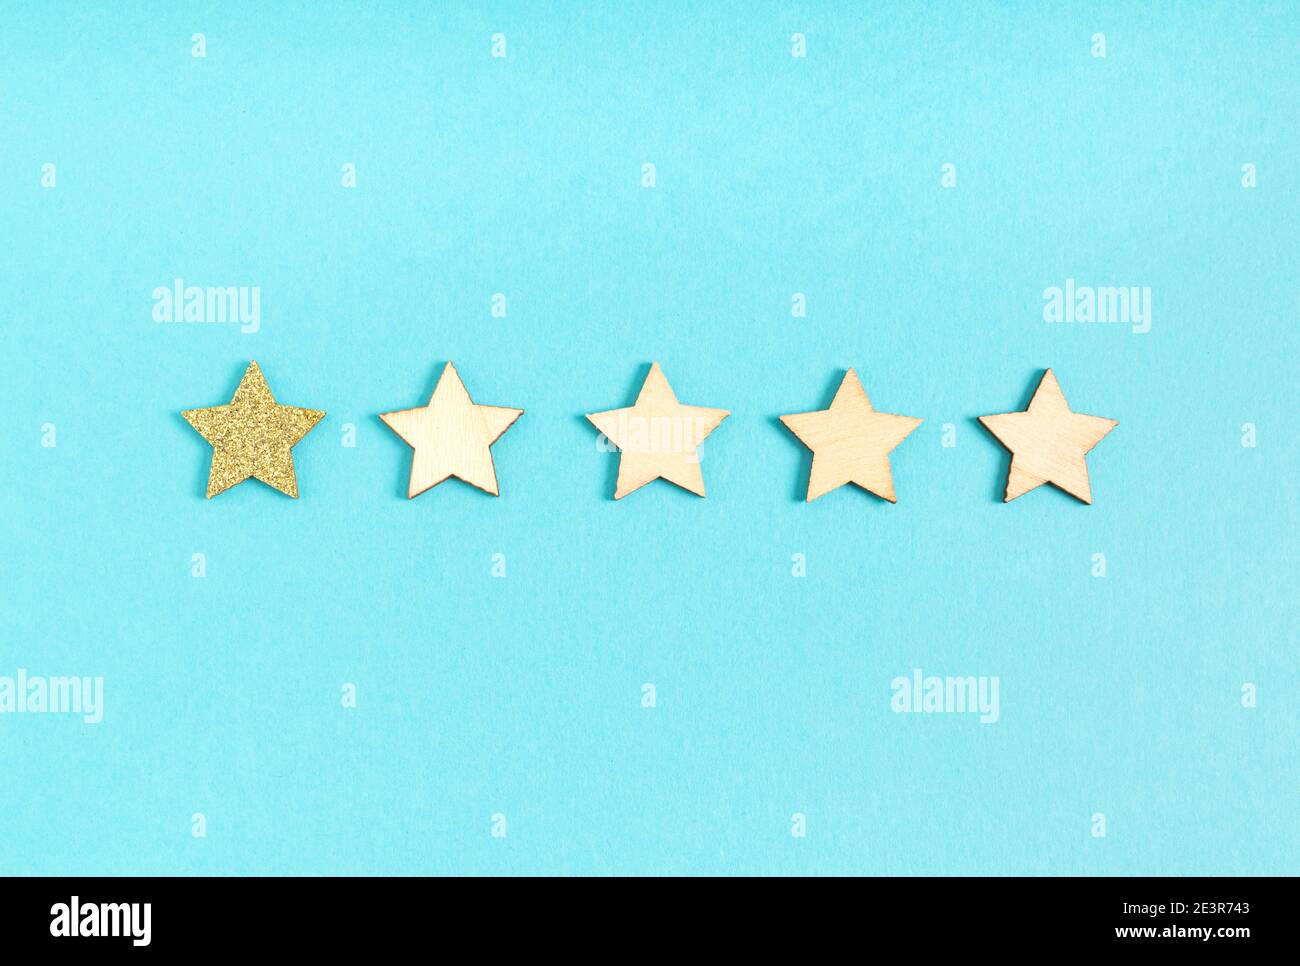 One star rating, one gold glittery star and four wooden stars on a blue background Stock Photo